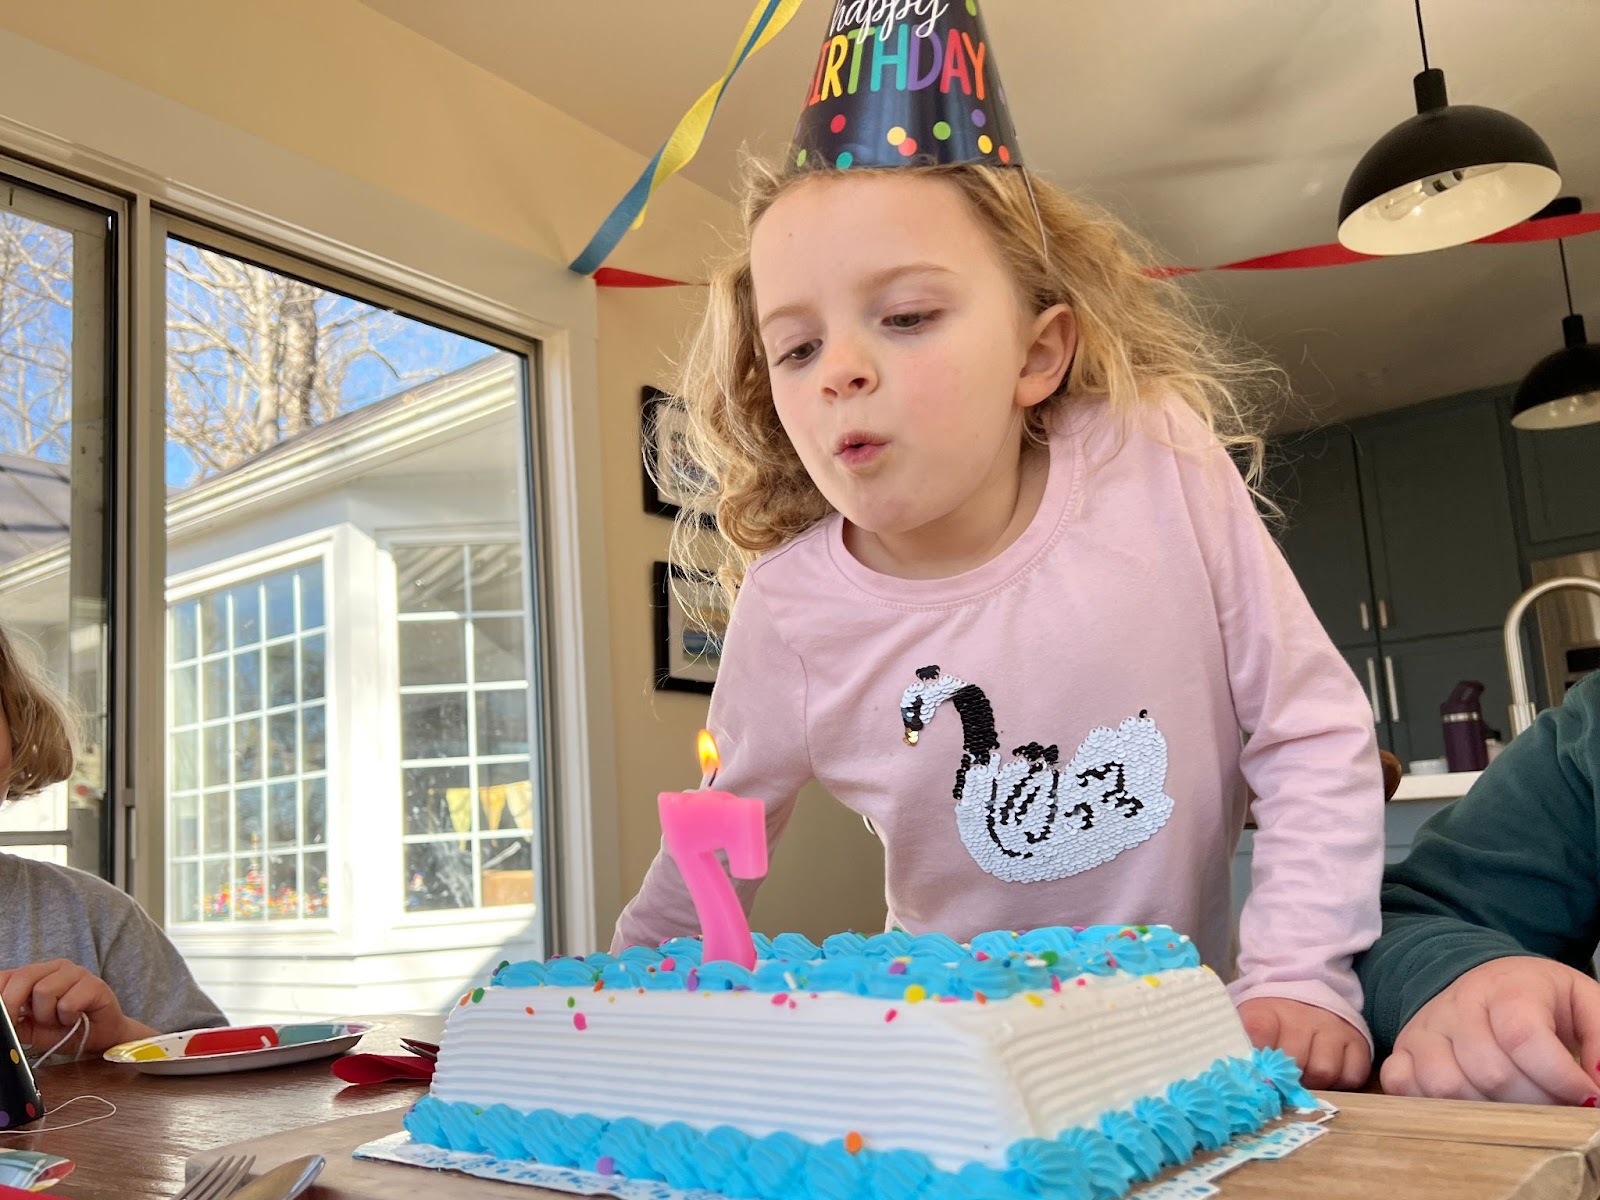 A little girl in a pink shirt with a swan on the front blows out a candle on a birthday cake shaped like the number 7.